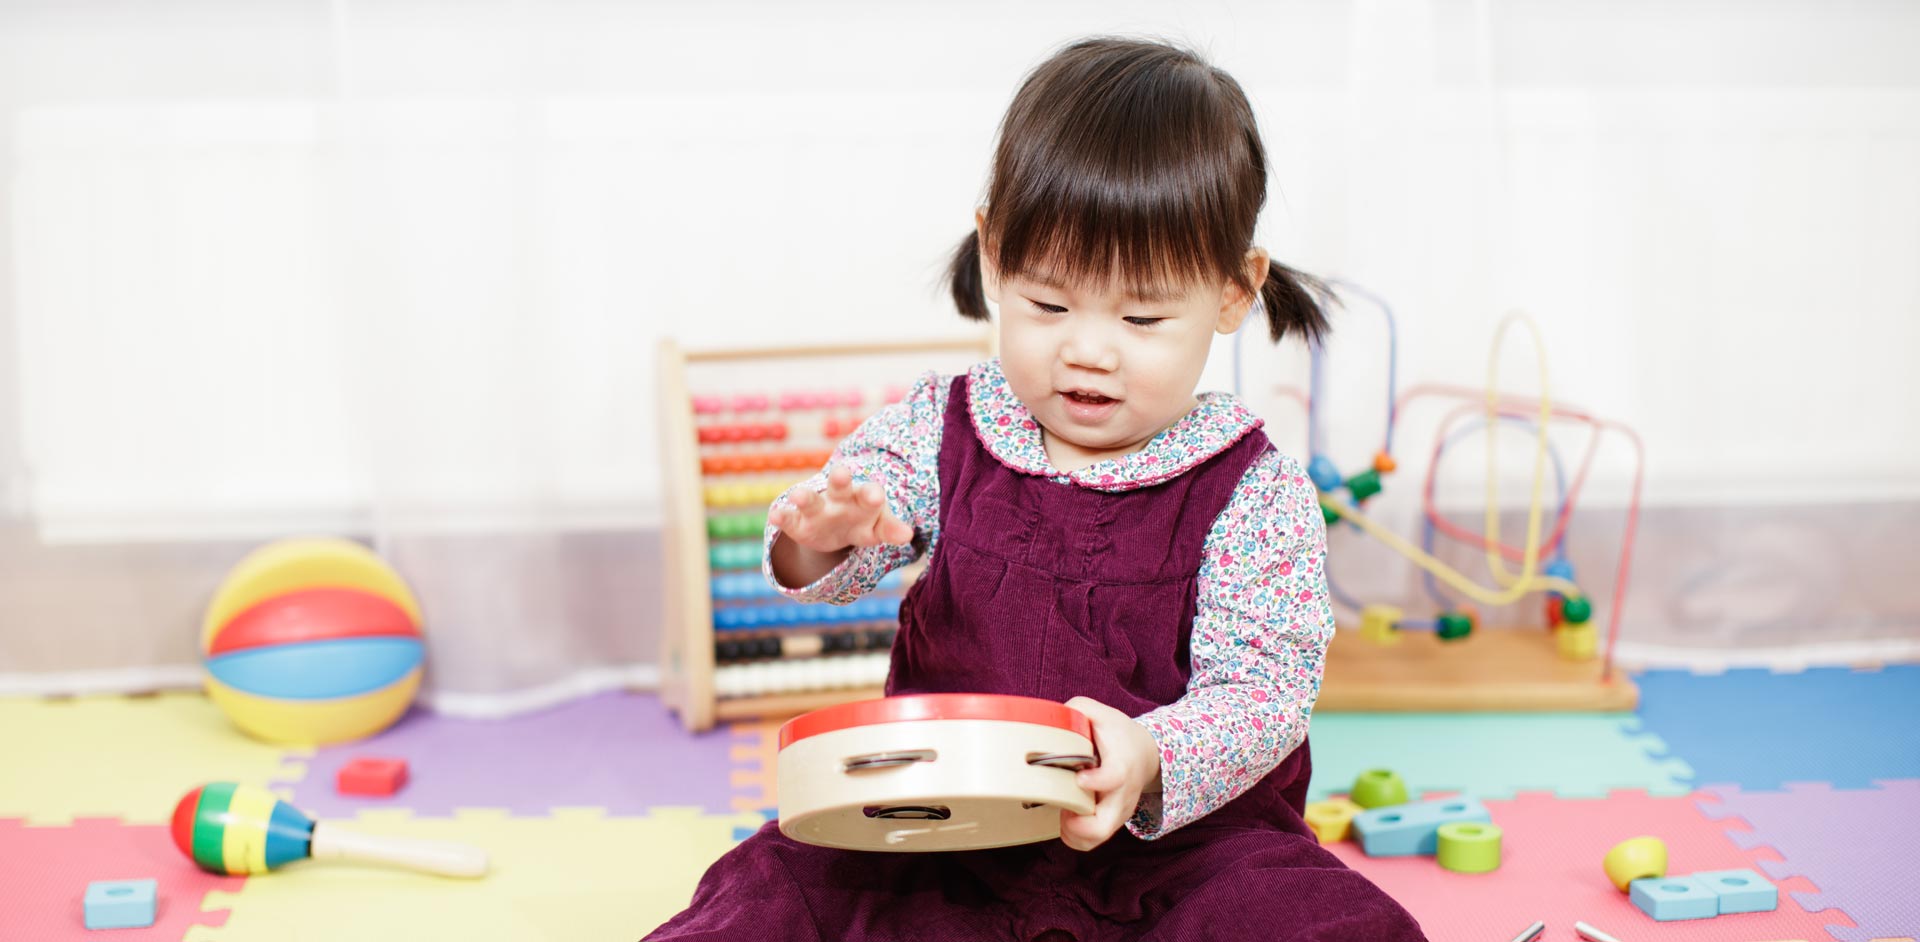 A toddler plays with a tambourine